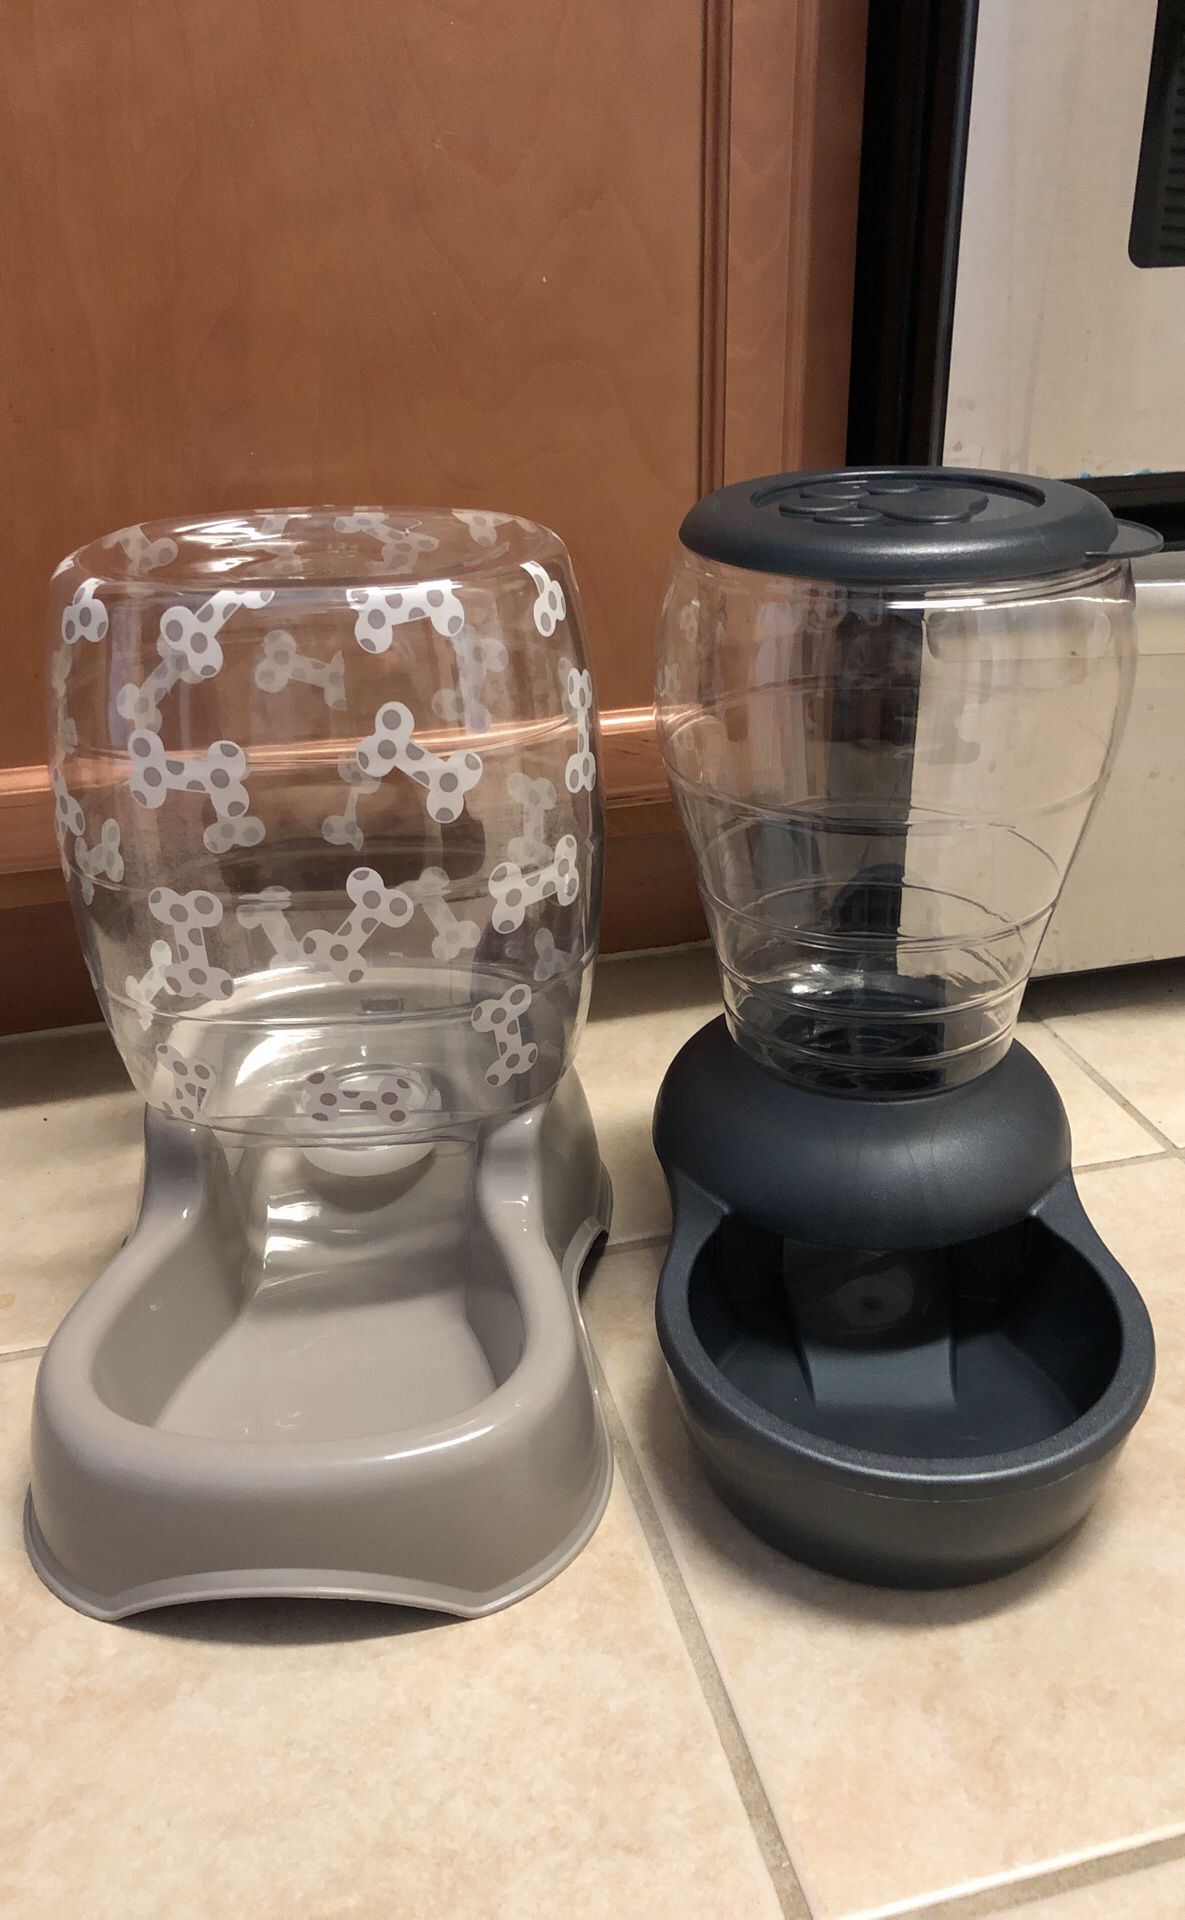 Pet food and water dispensers